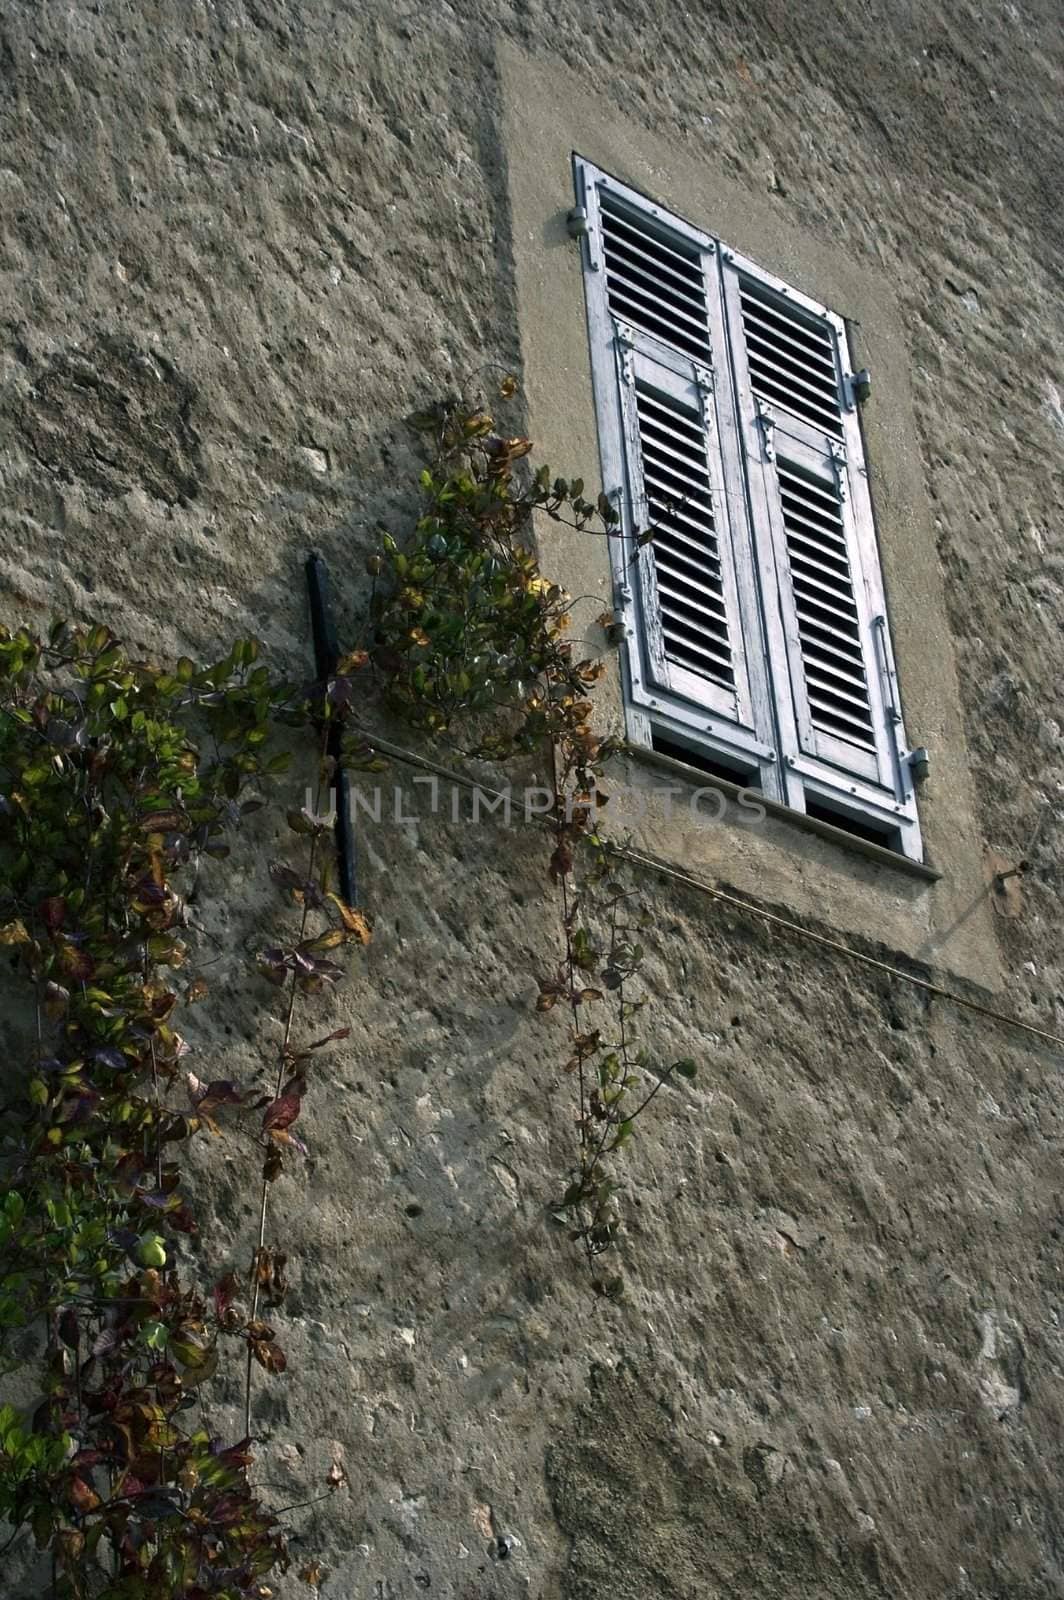 Window in the medieval house with the folwers growing on the wall
